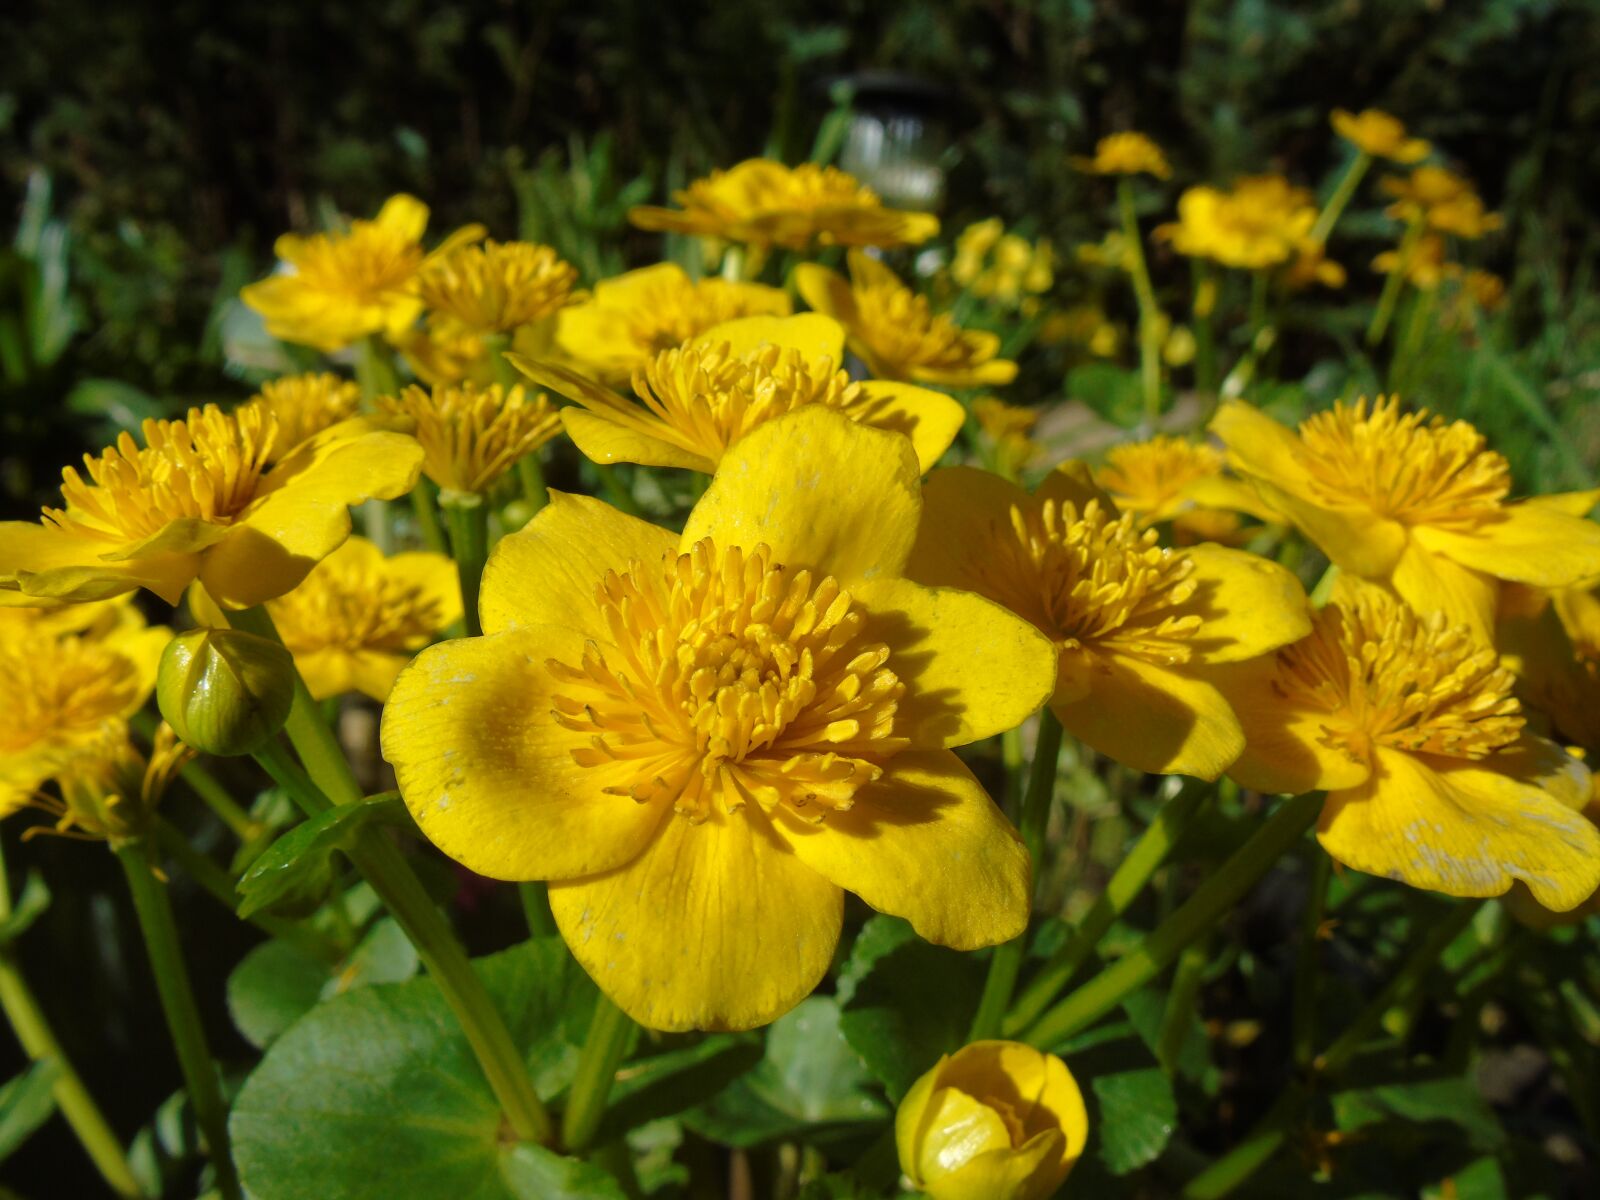 Sony Cyber-shot DSC-H400 sample photo. Caltha palustris, yellow, flowers photography